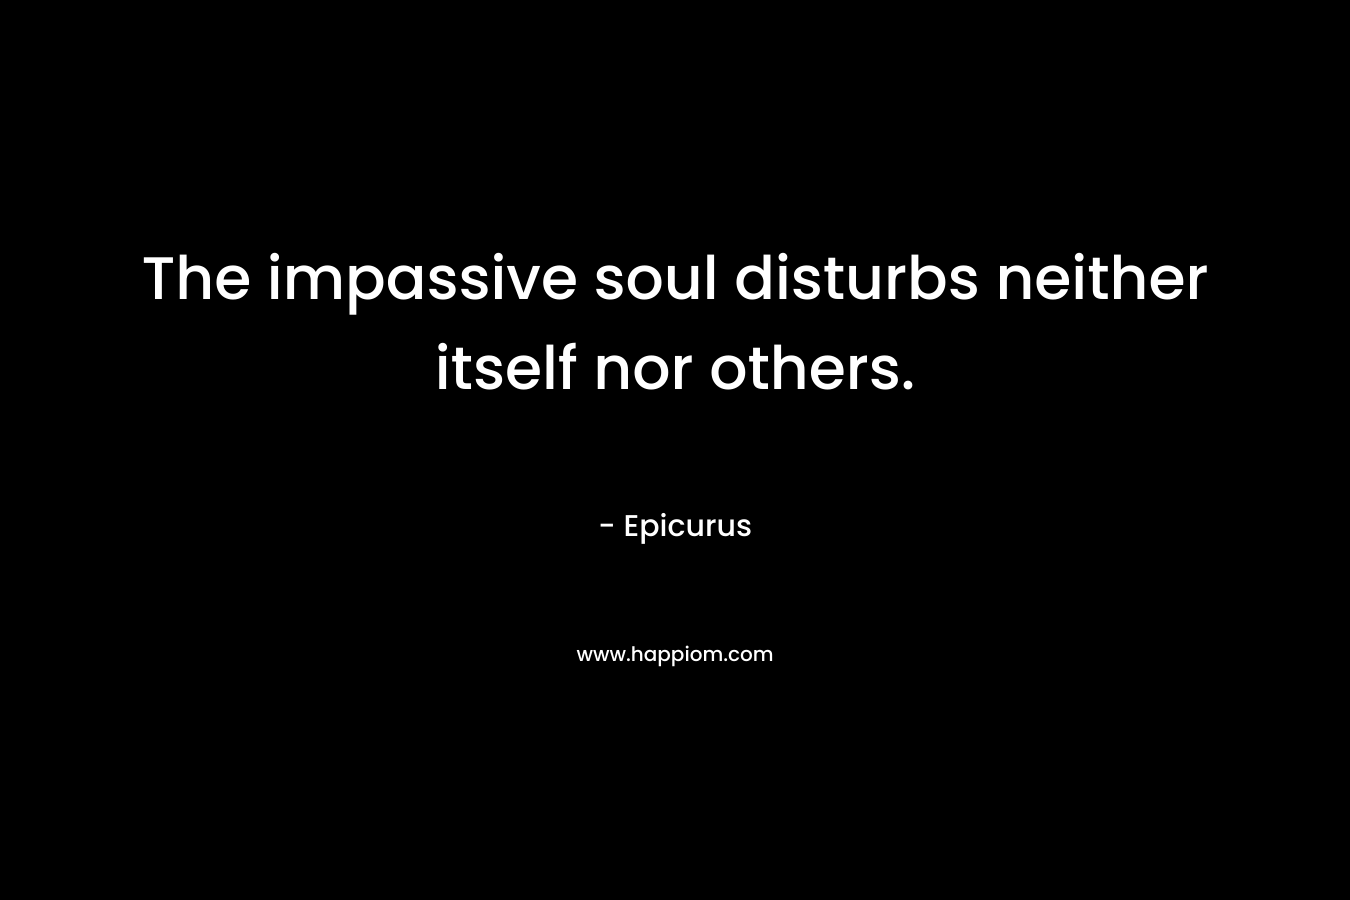 The impassive soul disturbs neither itself nor others. – Epicurus